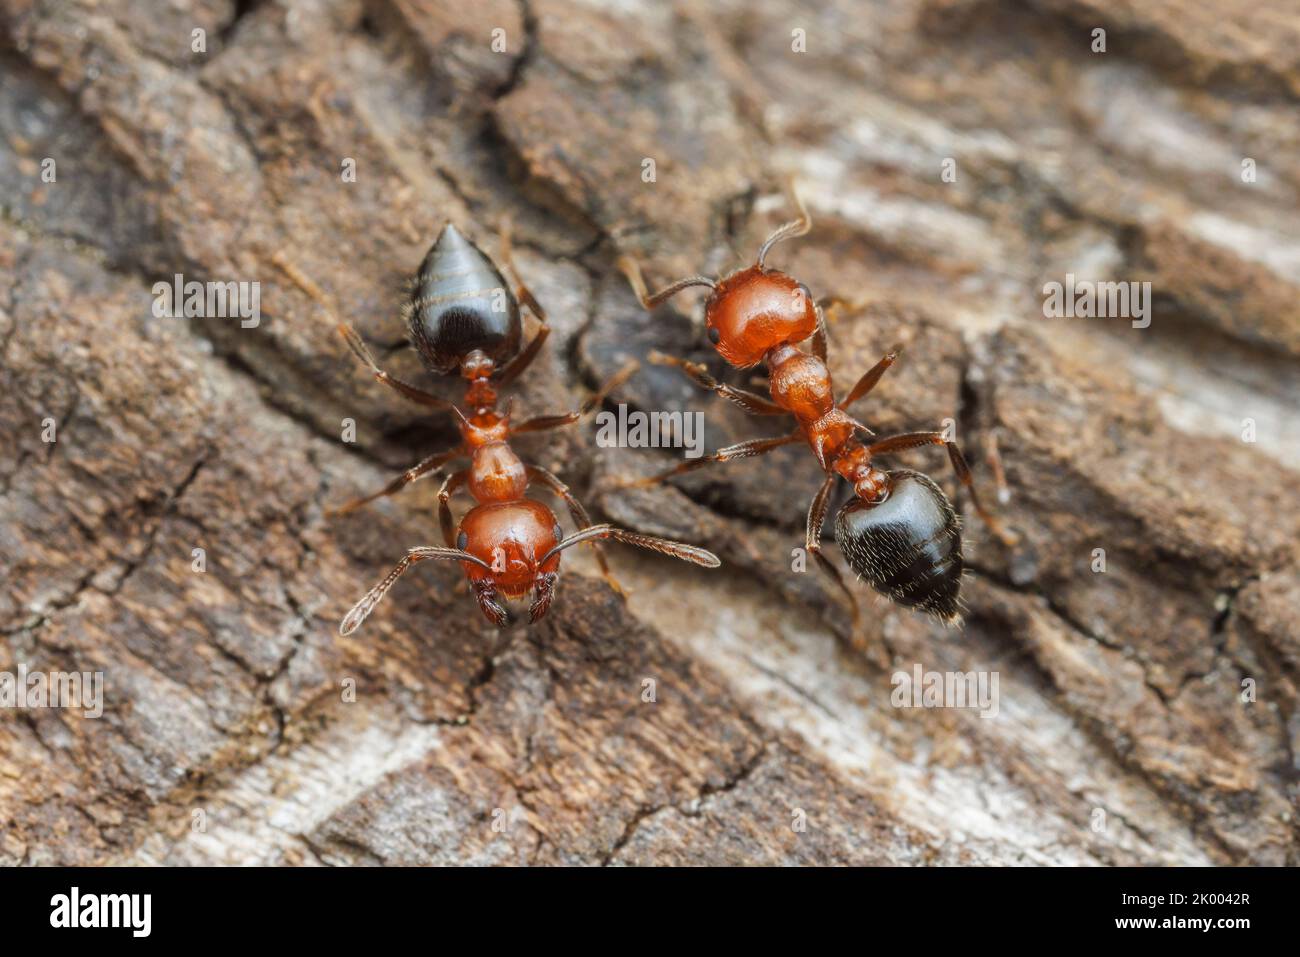 Acrobat Ant (Crematogaster laeviuscula) workers pass each other going opposite directions on the side of a tree. Stock Photo